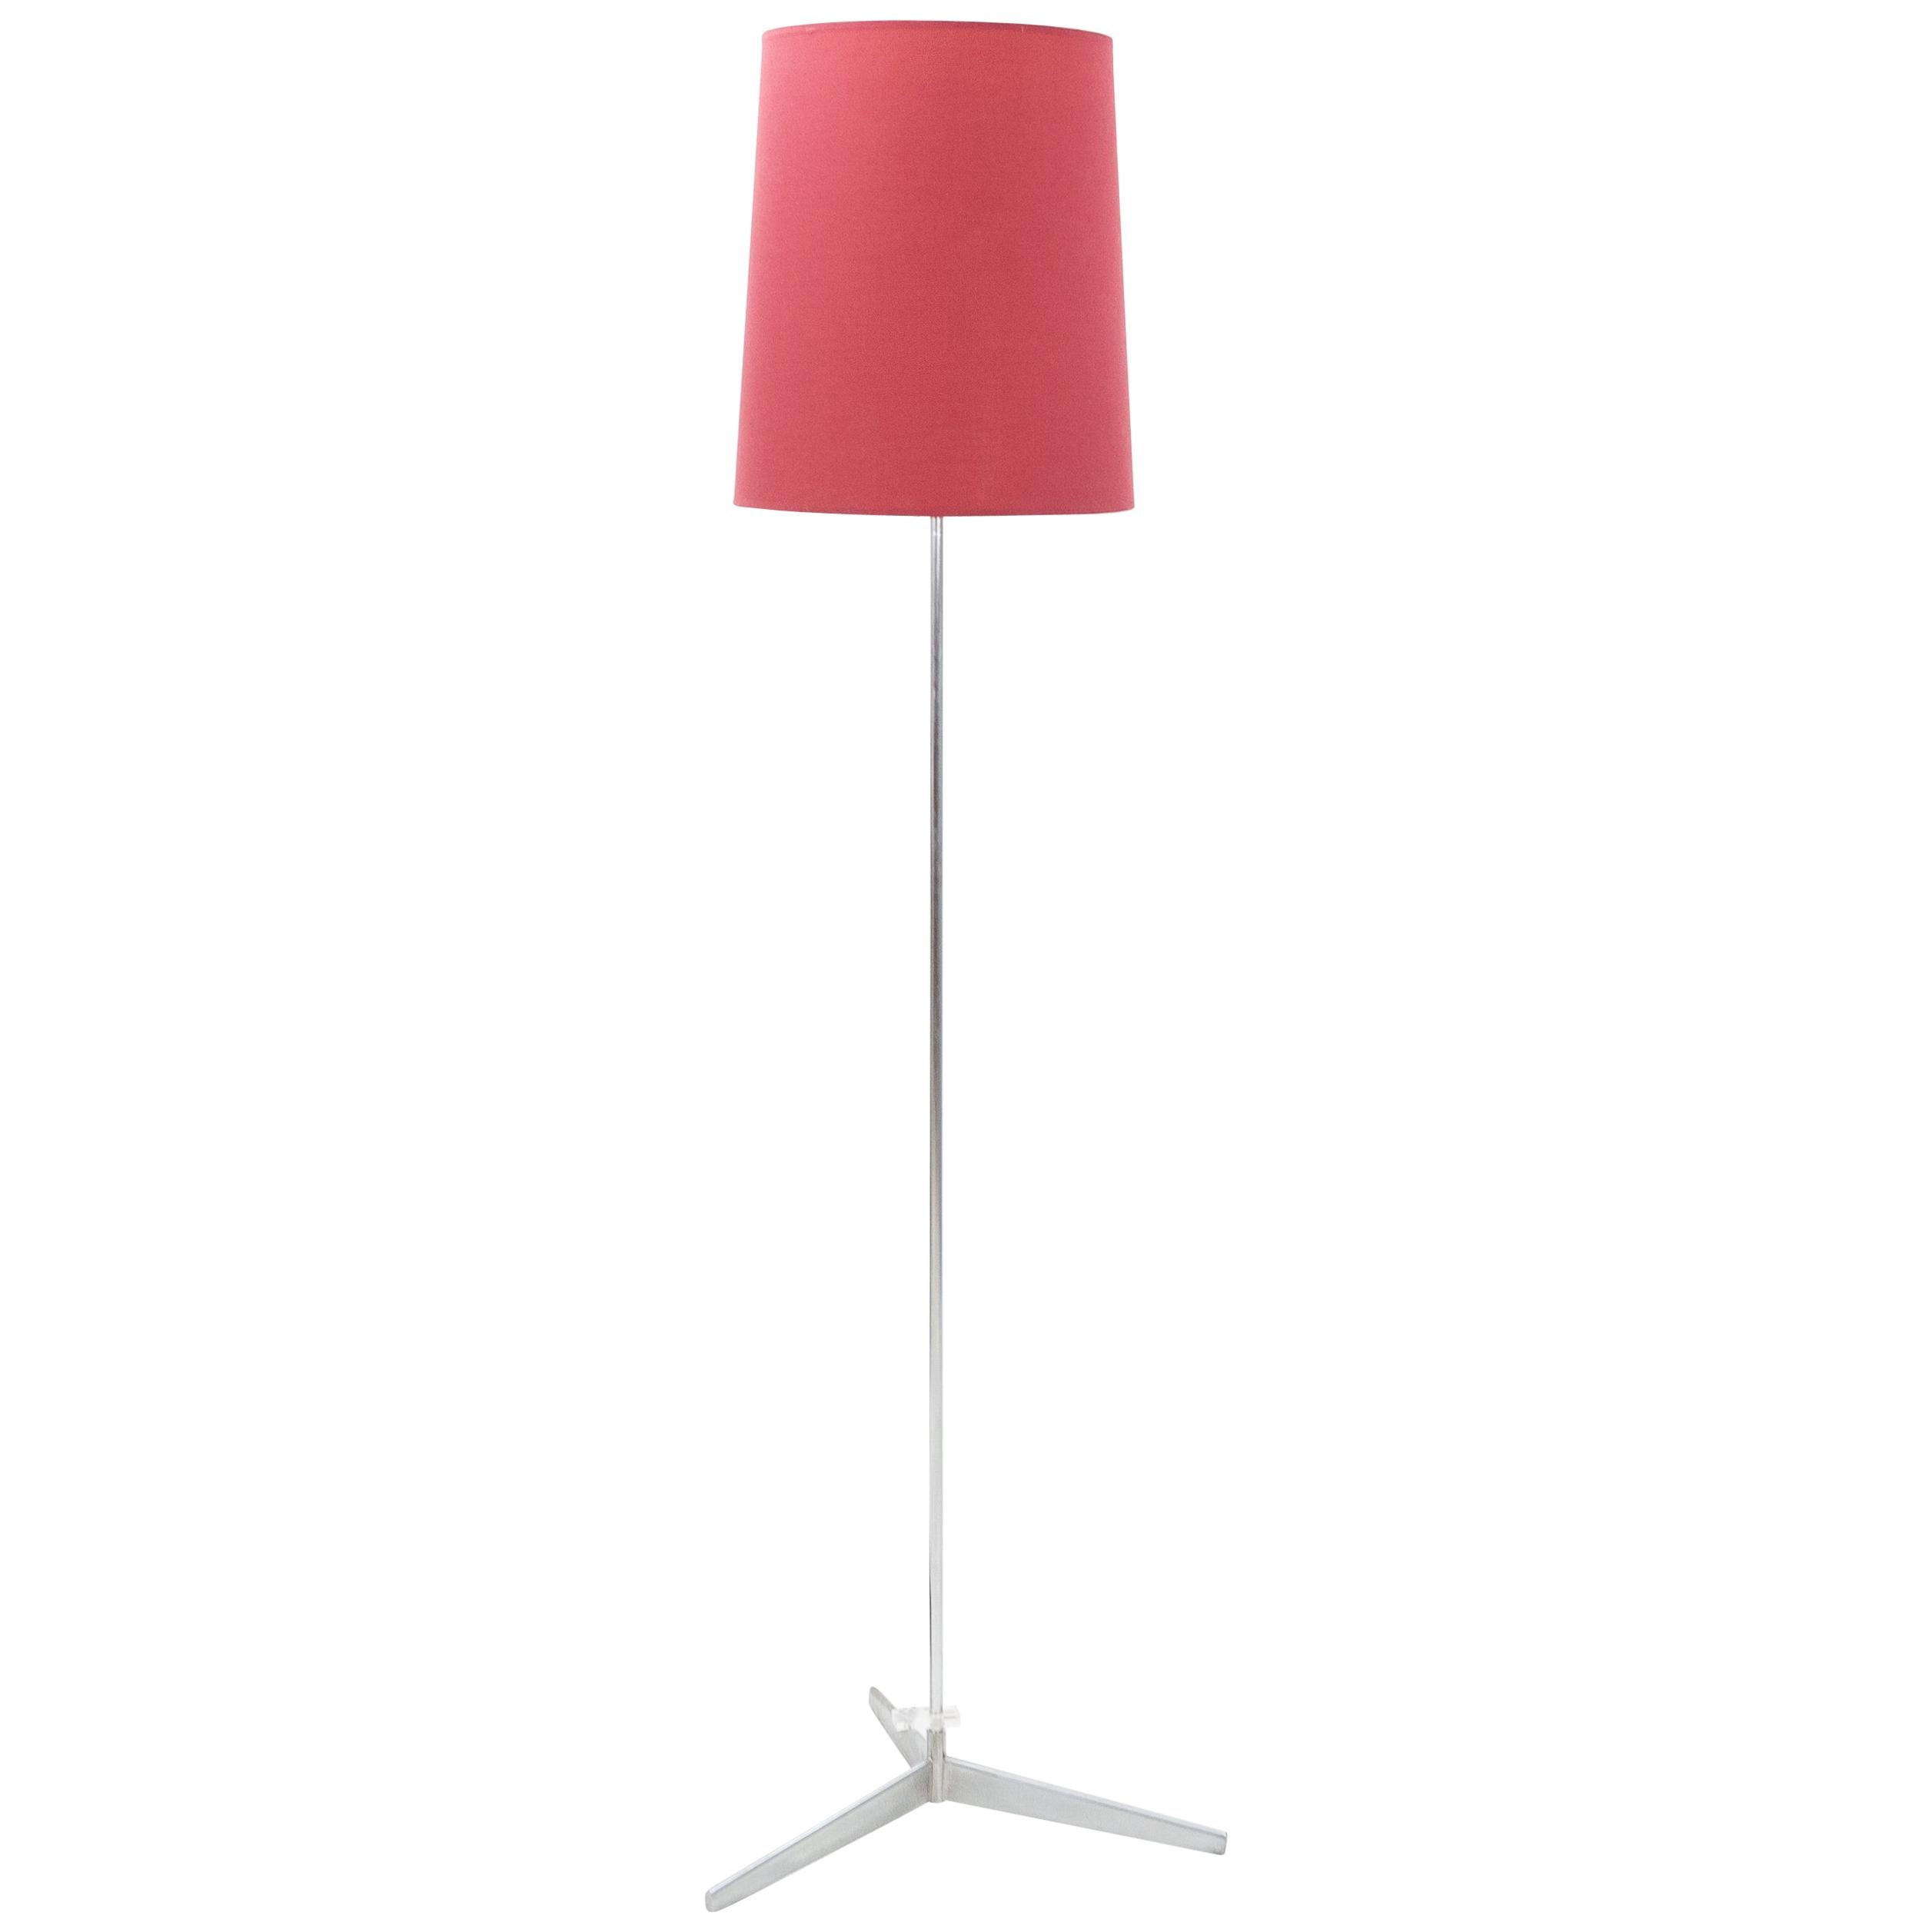 Gepo Amsterdam Floor Lamp For Sale